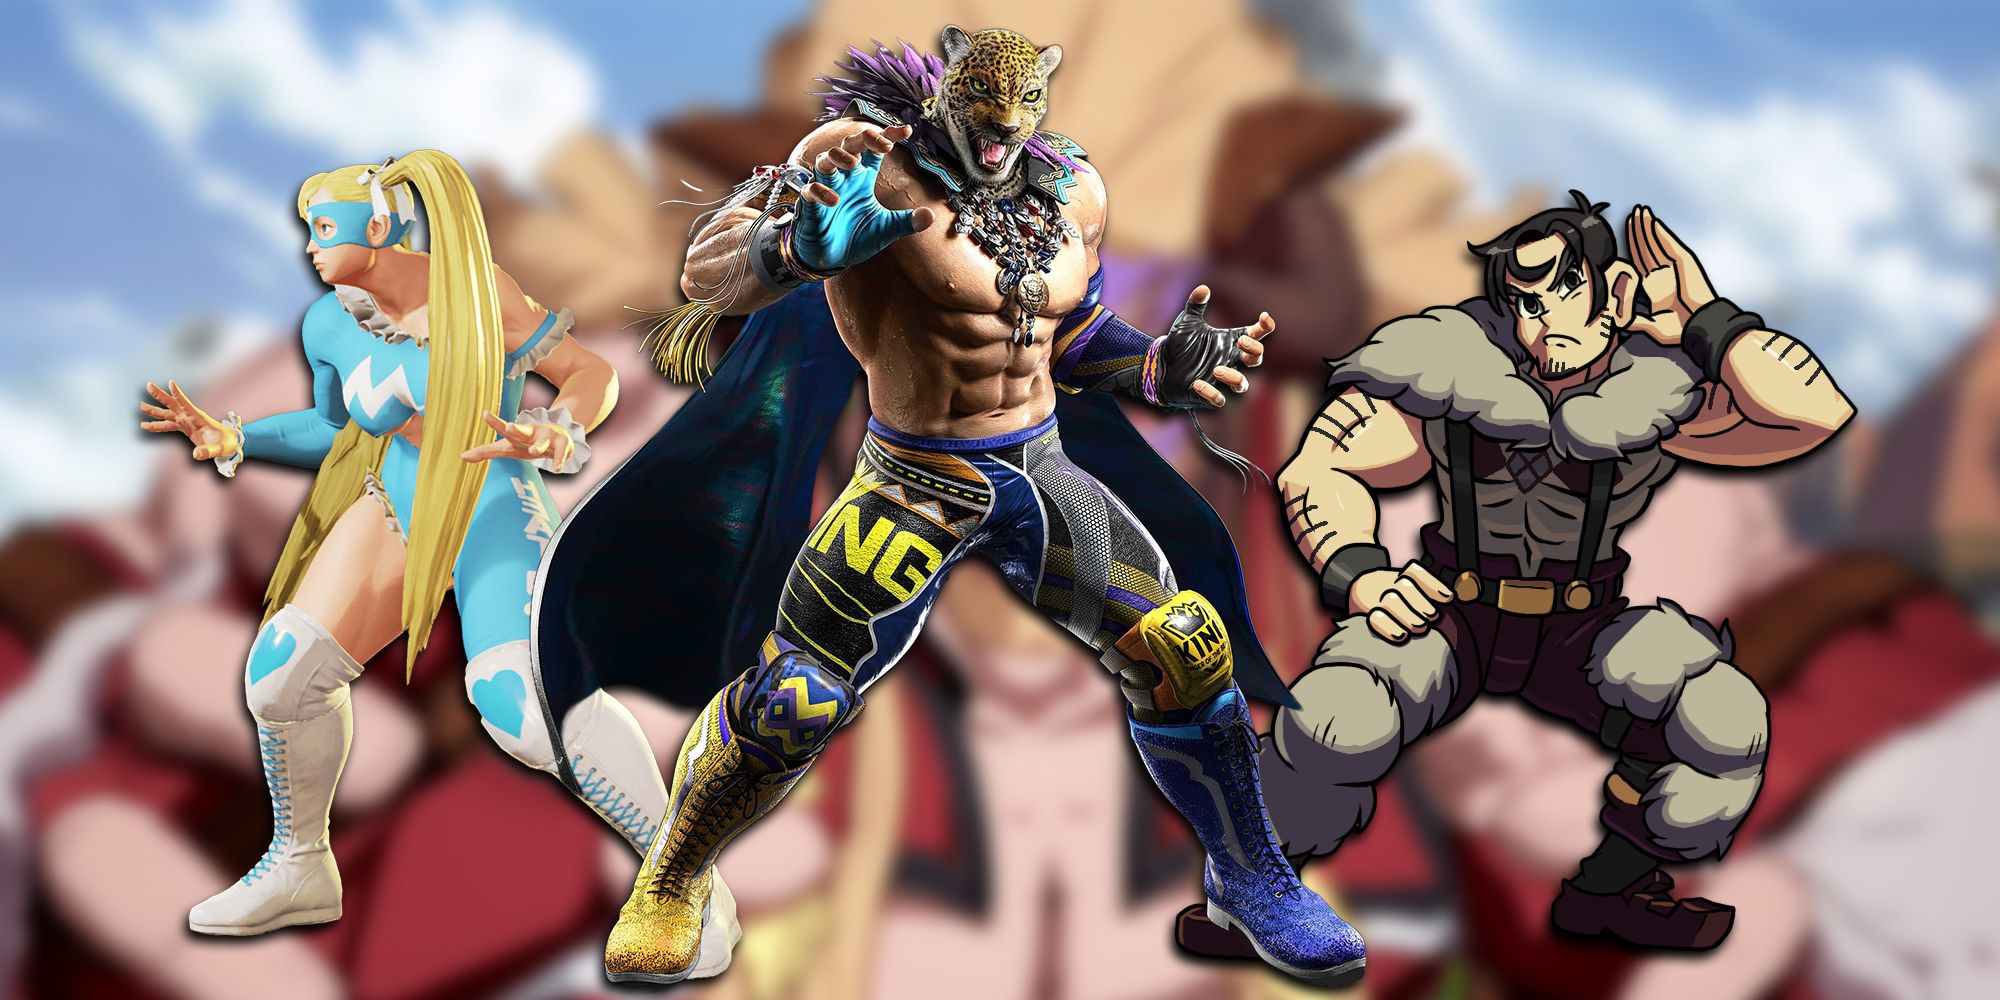 Three iconic wrestler and or performer type characters in fighting games especially